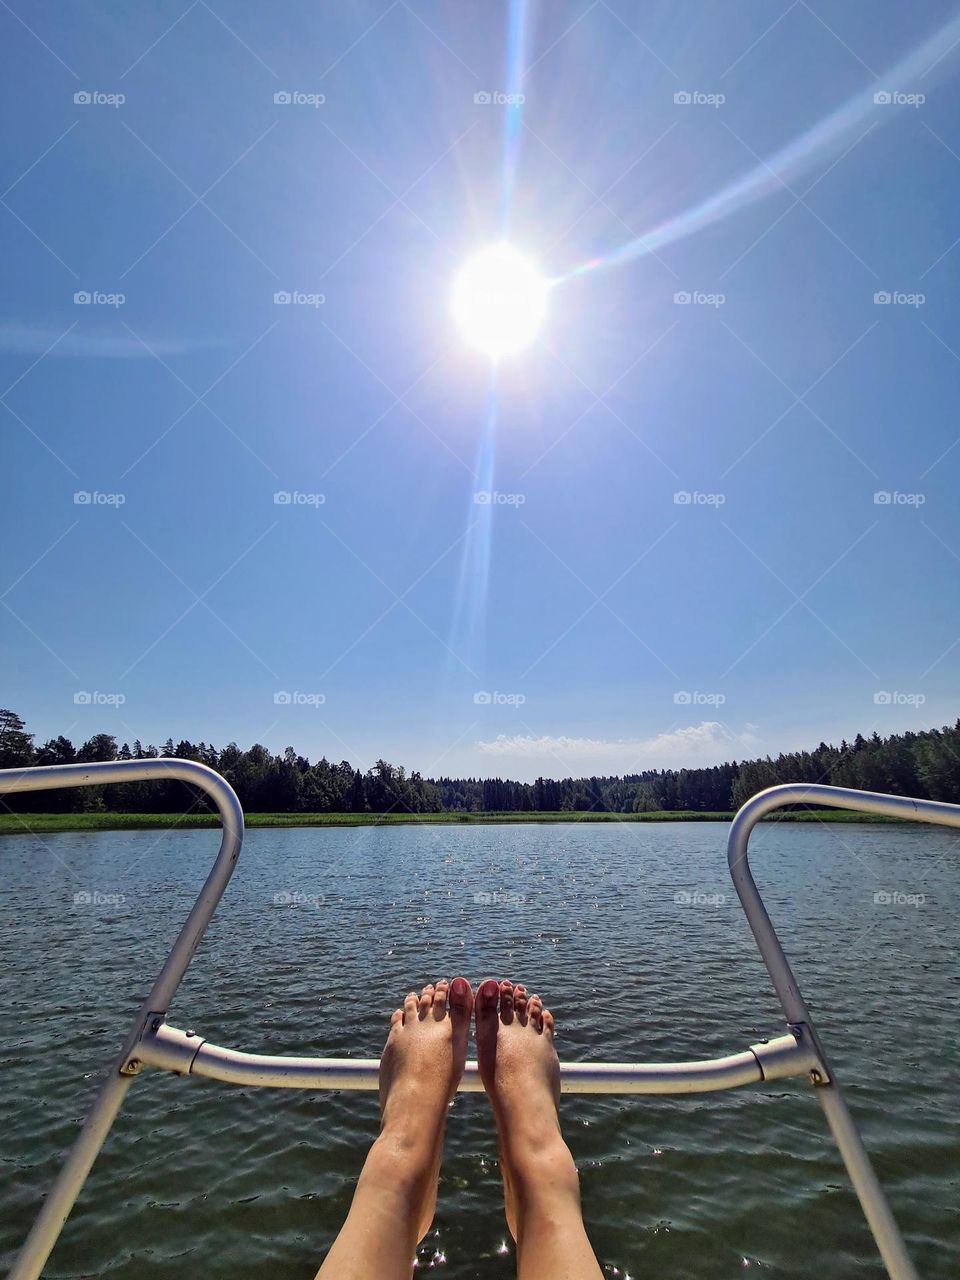  Bright summer day with clear high sun and lady feet on the fence of the boat